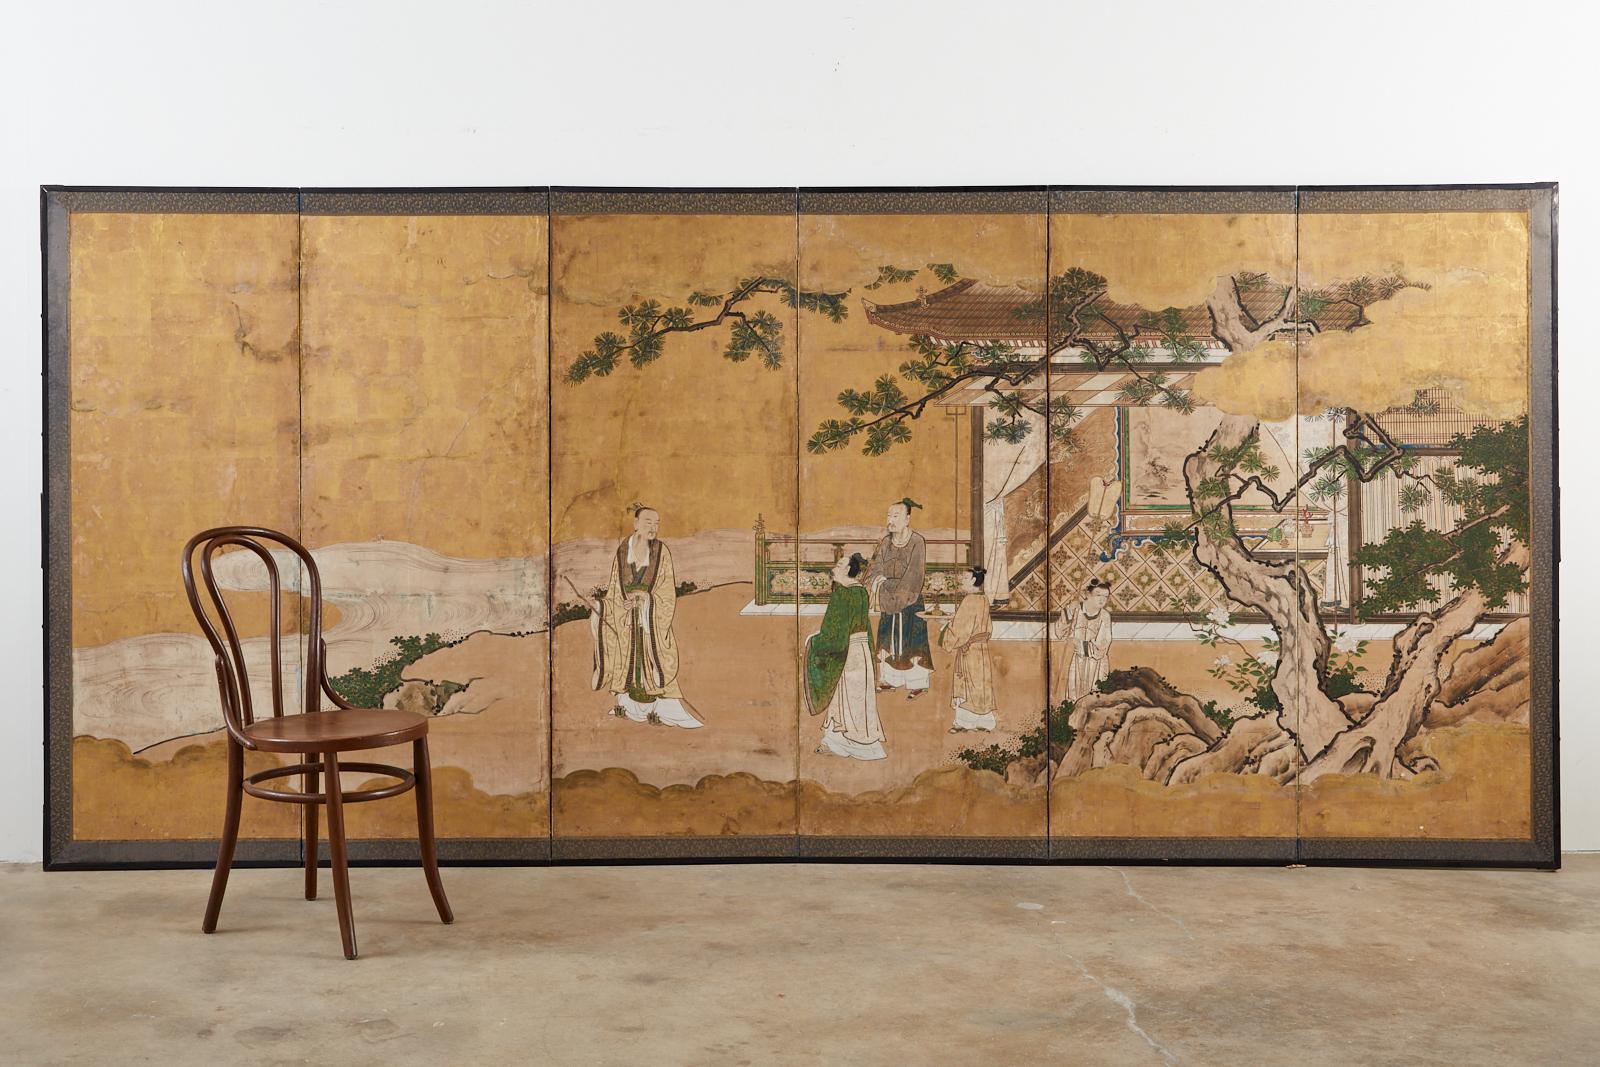 Early 18th century Japanese Tokugawa Edo period six-panel kano screen depicting the Emperor in conversation on a garden terrace. Crafted from ink and natural color pigments on gold leaf squares set in a lacquered frame. The genre is based on the